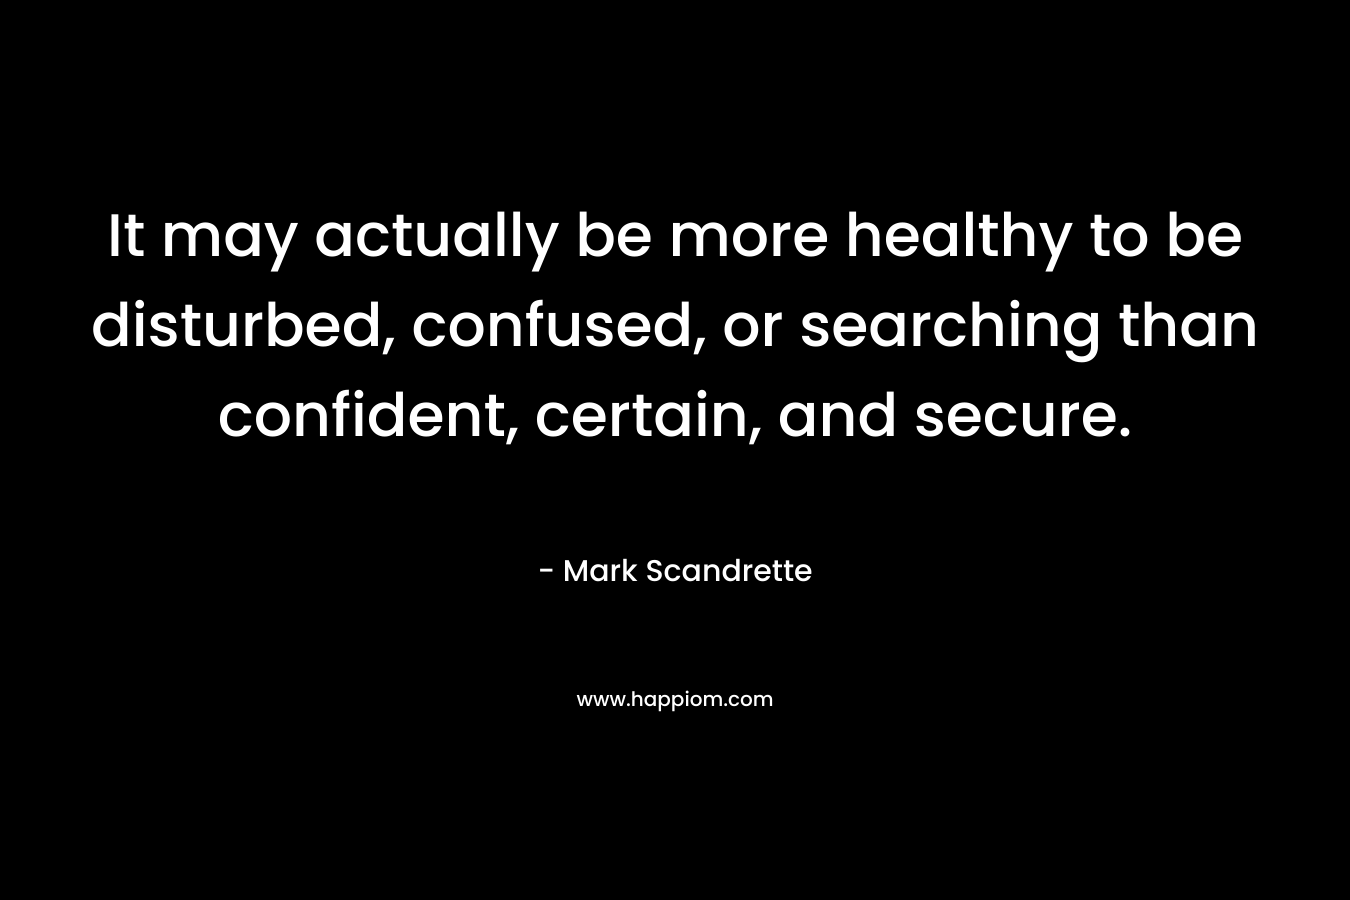 It may actually be more healthy to be disturbed, confused, or searching than confident, certain, and secure. – Mark Scandrette